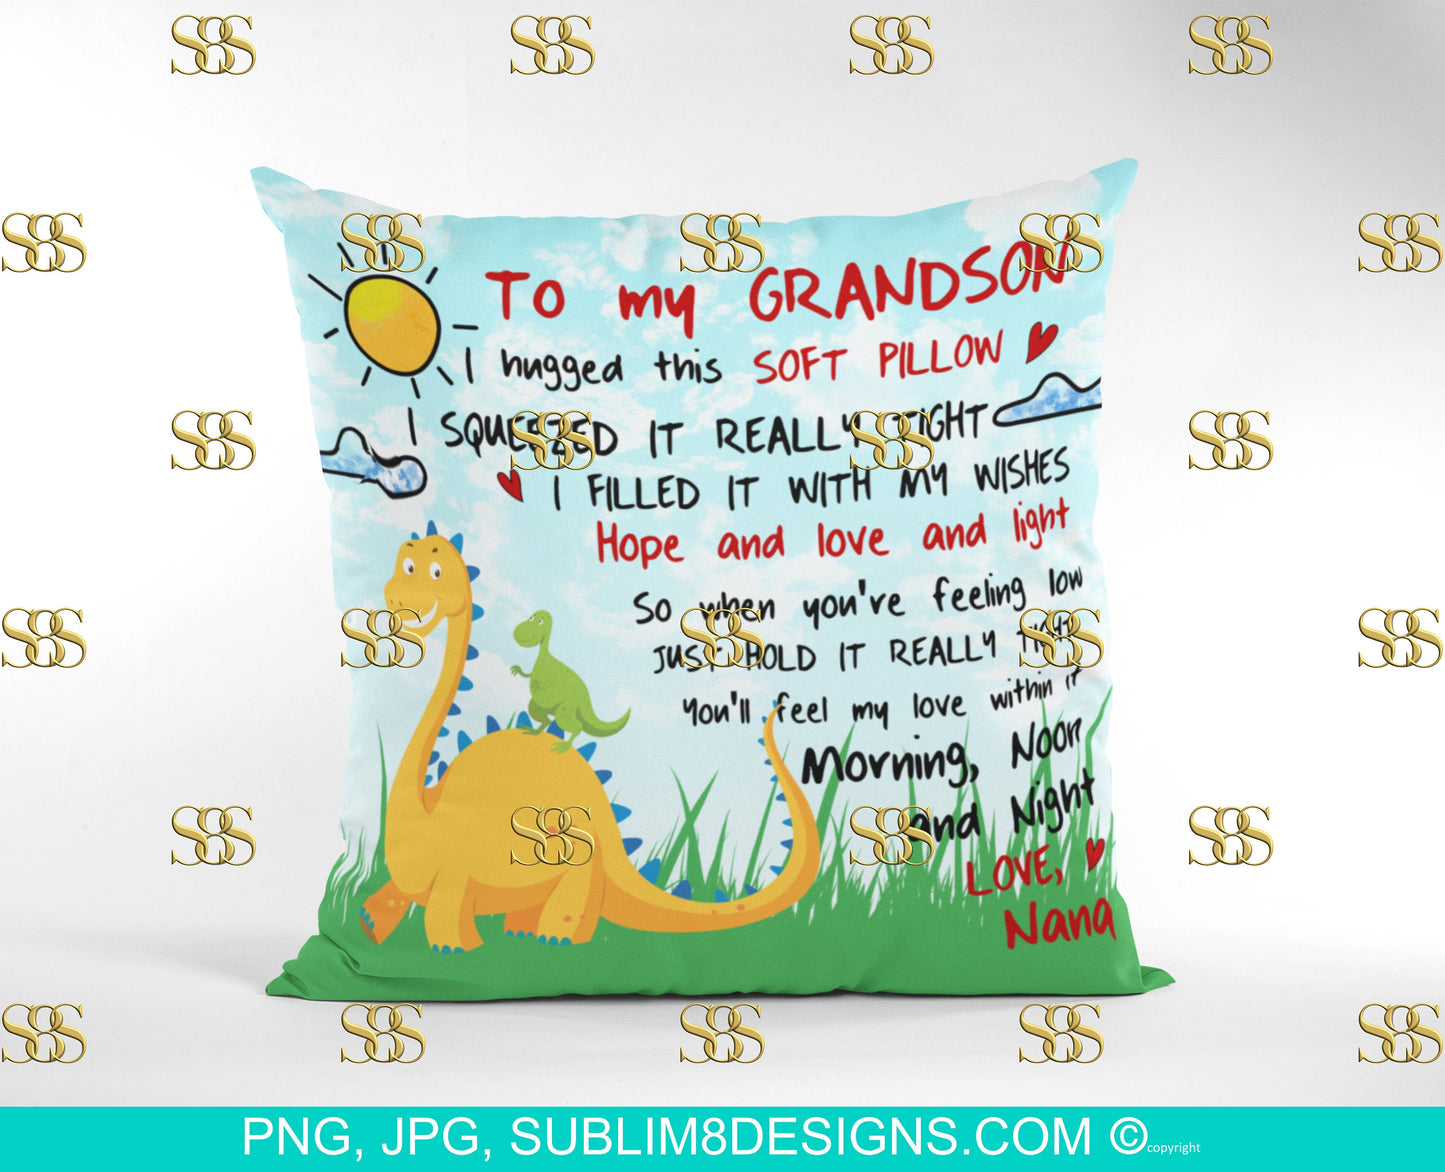 To My Grandson Love Nana Square Pillow | Cushion Cover | Dinosaur Gifts | Dinosaur | Sublimation Design PNG and JPG ONLY